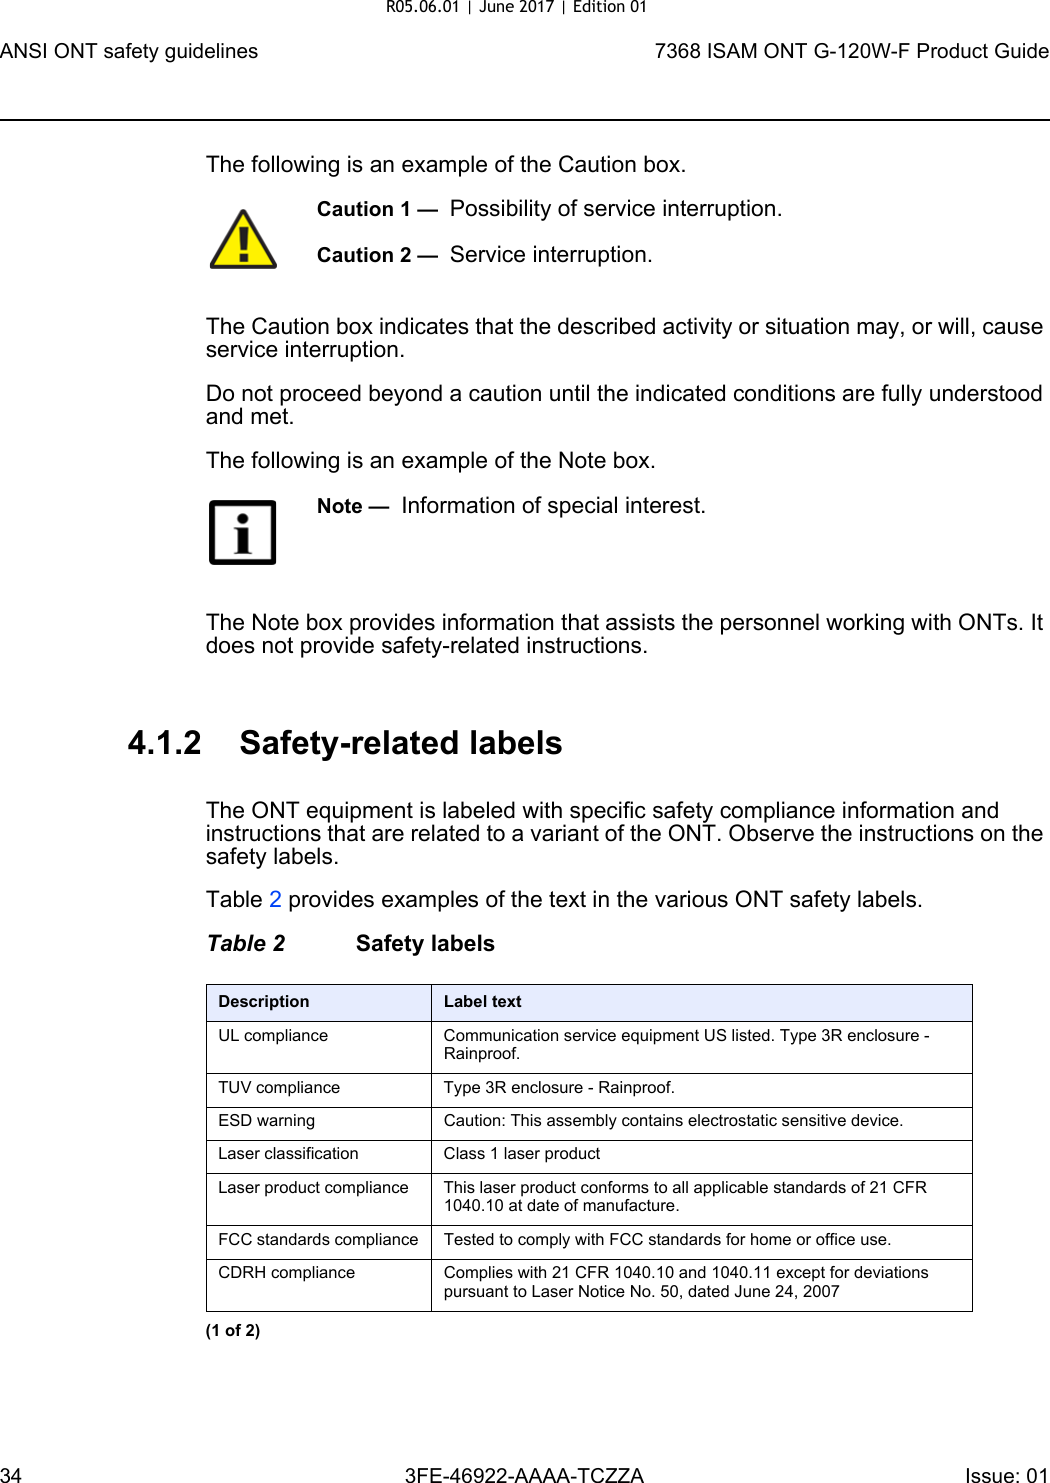 ANSI ONT safety guidelines347368 ISAM ONT G-120W-F Product Guide3FE-46922-AAAA-TCZZA Issue: 01 The following is an example of the Caution box.The Caution box indicates that the described activity or situation may, or will, cause service interruption.Do not proceed beyond a caution until the indicated conditions are fully understood and met.The following is an example of the Note box.The Note box provides information that assists the personnel working with ONTs. It does not provide safety-related instructions.4.1.2 Safety-related labelsThe ONT equipment is labeled with specific safety compliance information and instructions that are related to a variant of the ONT. Observe the instructions on the safety labels.Table 2 provides examples of the text in the various ONT safety labels.Table 2 Safety labelsCaution 1 —  Possibility of service interruption.Caution 2 —  Service interruption.Note —  Information of special interest.Description Label textUL compliance Communication service equipment US listed. Type 3R enclosure - Rainproof.TUV compliance Type 3R enclosure - Rainproof.ESD warning Caution: This assembly contains electrostatic sensitive device.Laser classification Class 1 laser productLaser product compliance This laser product conforms to all applicable standards of 21 CFR 1040.10 at date of manufacture.FCC standards compliance Tested to comply with FCC standards for home or office use.CDRH compliance Complies with 21 CFR 1040.10 and 1040.11 except for deviations pursuant to Laser Notice No. 50, dated June 24, 2007(1 of 2)R05.06.01 | June 2017 | Edition 01 